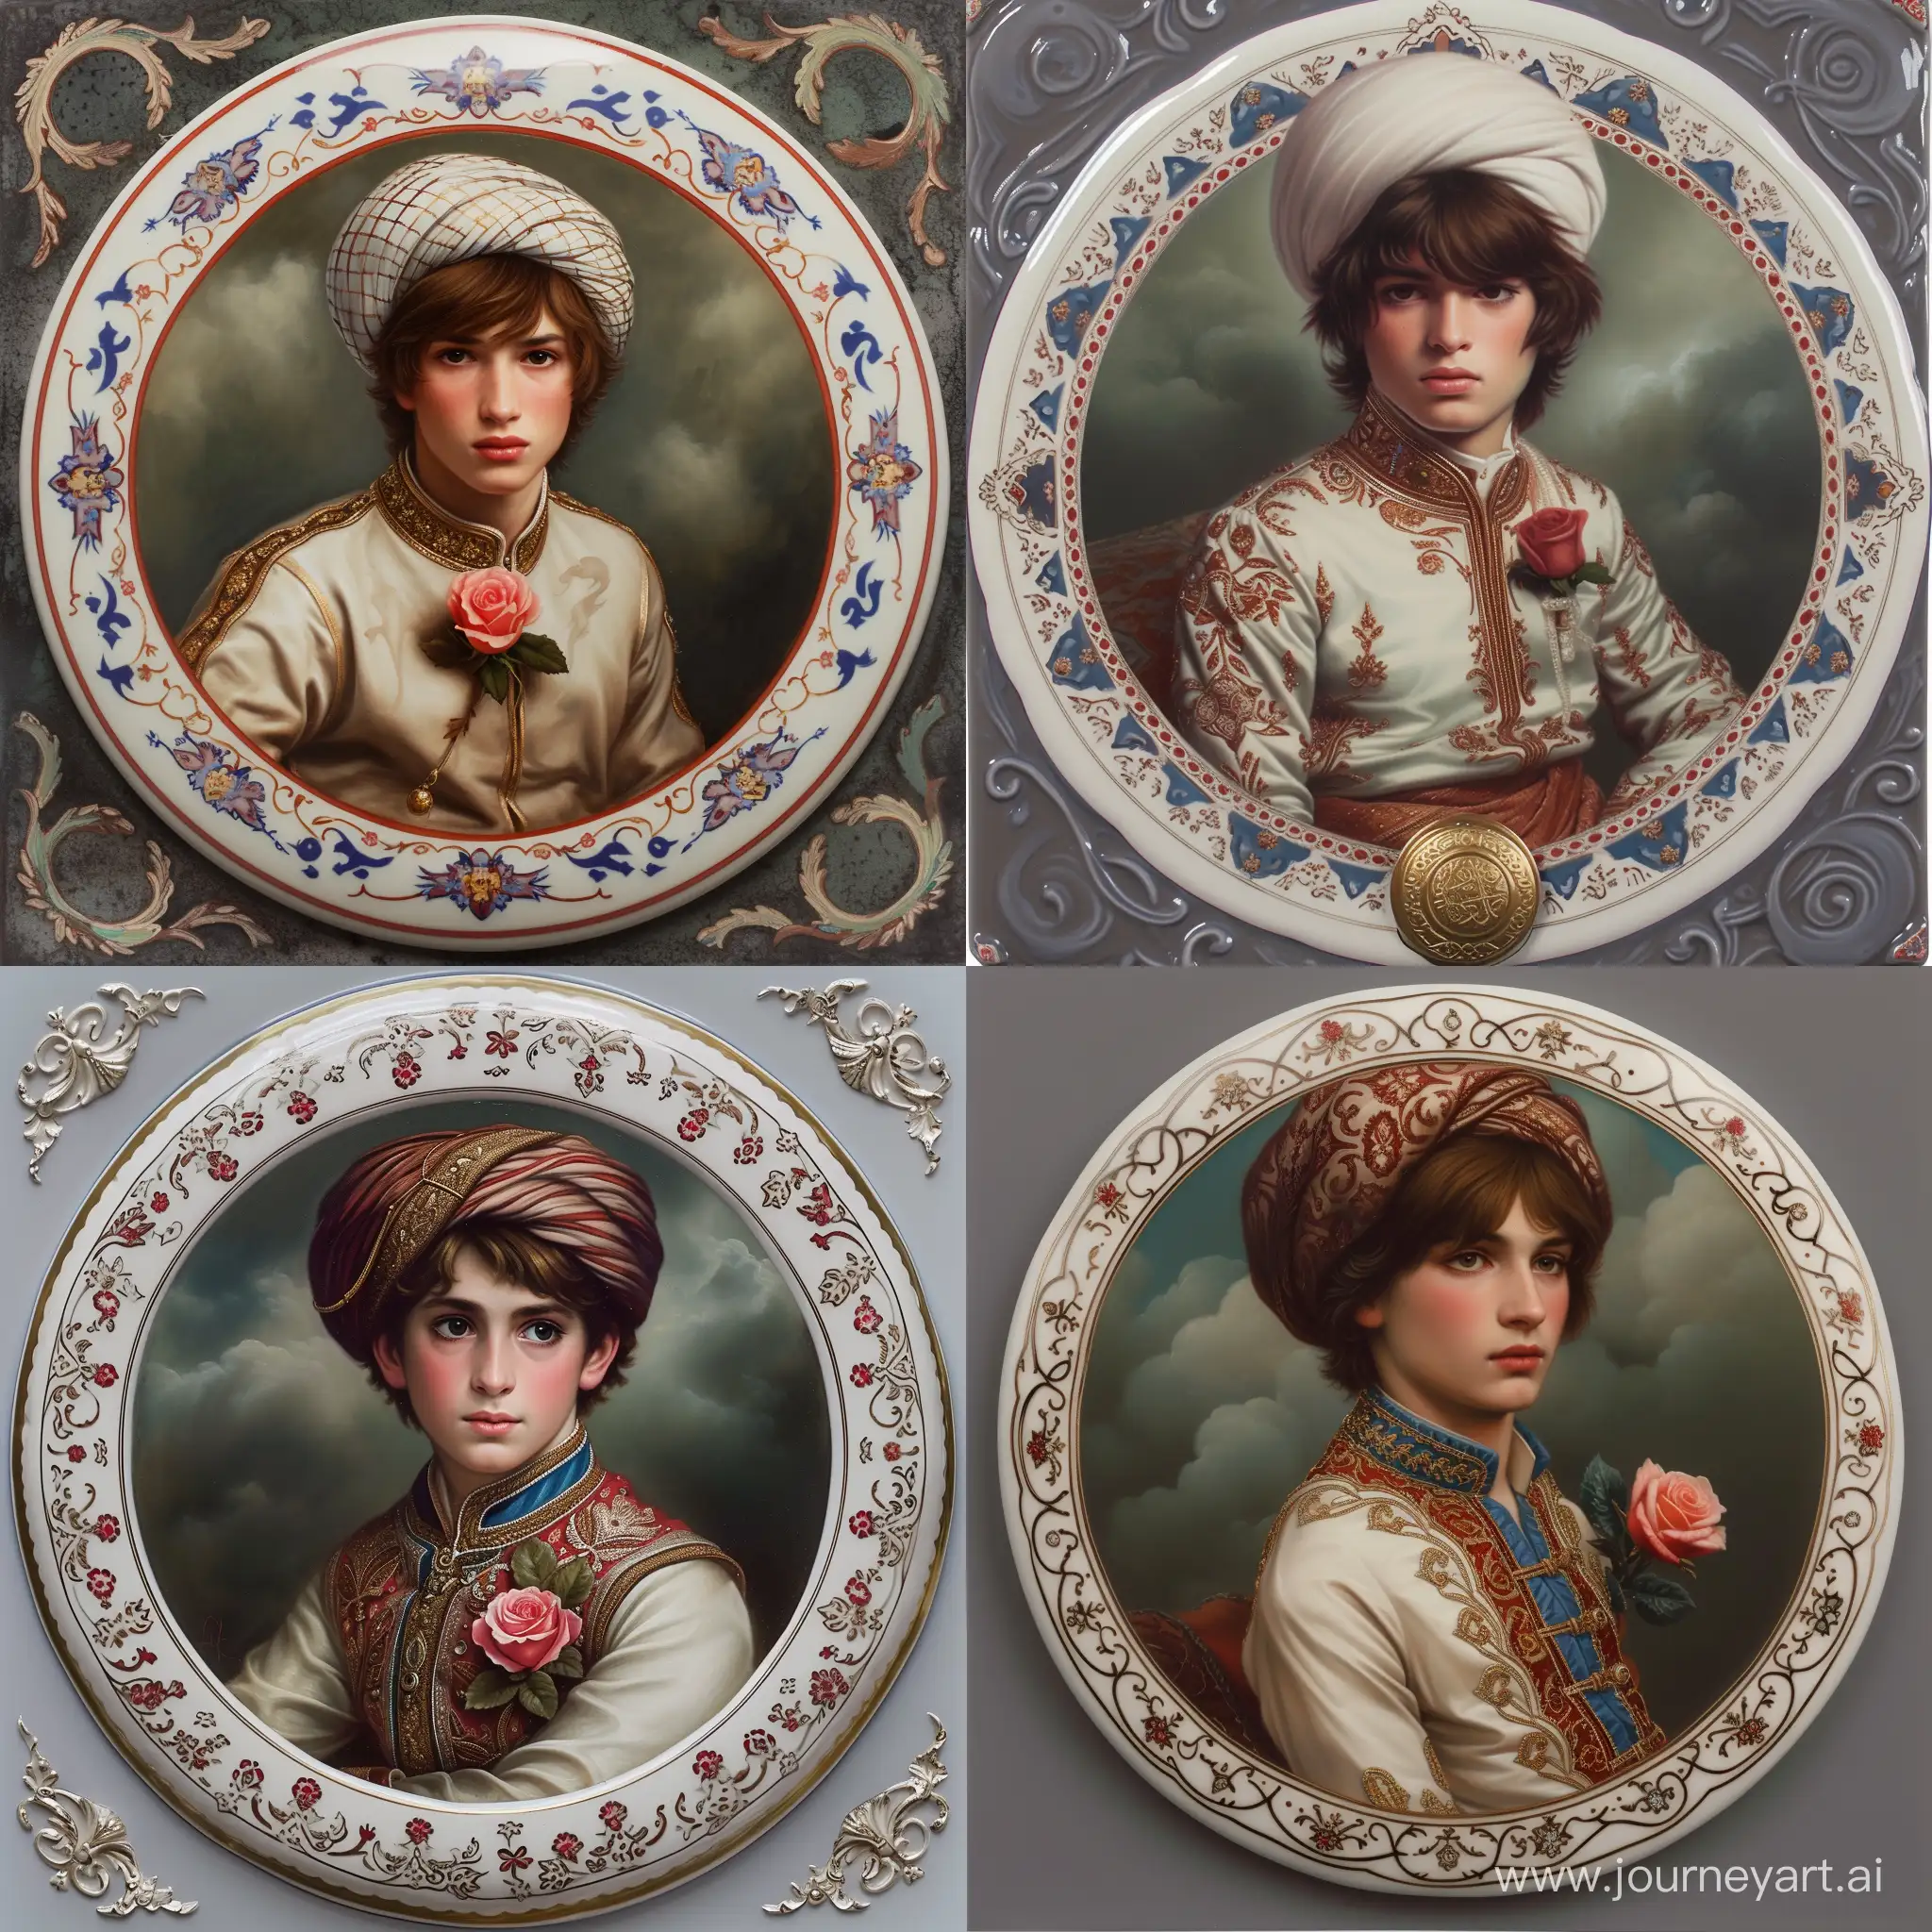 embedded on a round porcelain seal having white red blue carved persian floral arabesque embossed border with shiny gold ornaments, Medieval European portrait painting in style of Thomas Lawrence, depicting a young muslim prince with brown hairs, sitting and wearing full collar Arabian attire and Ottoman turban, rose flower on lapel, dark grey greenish cloudy background